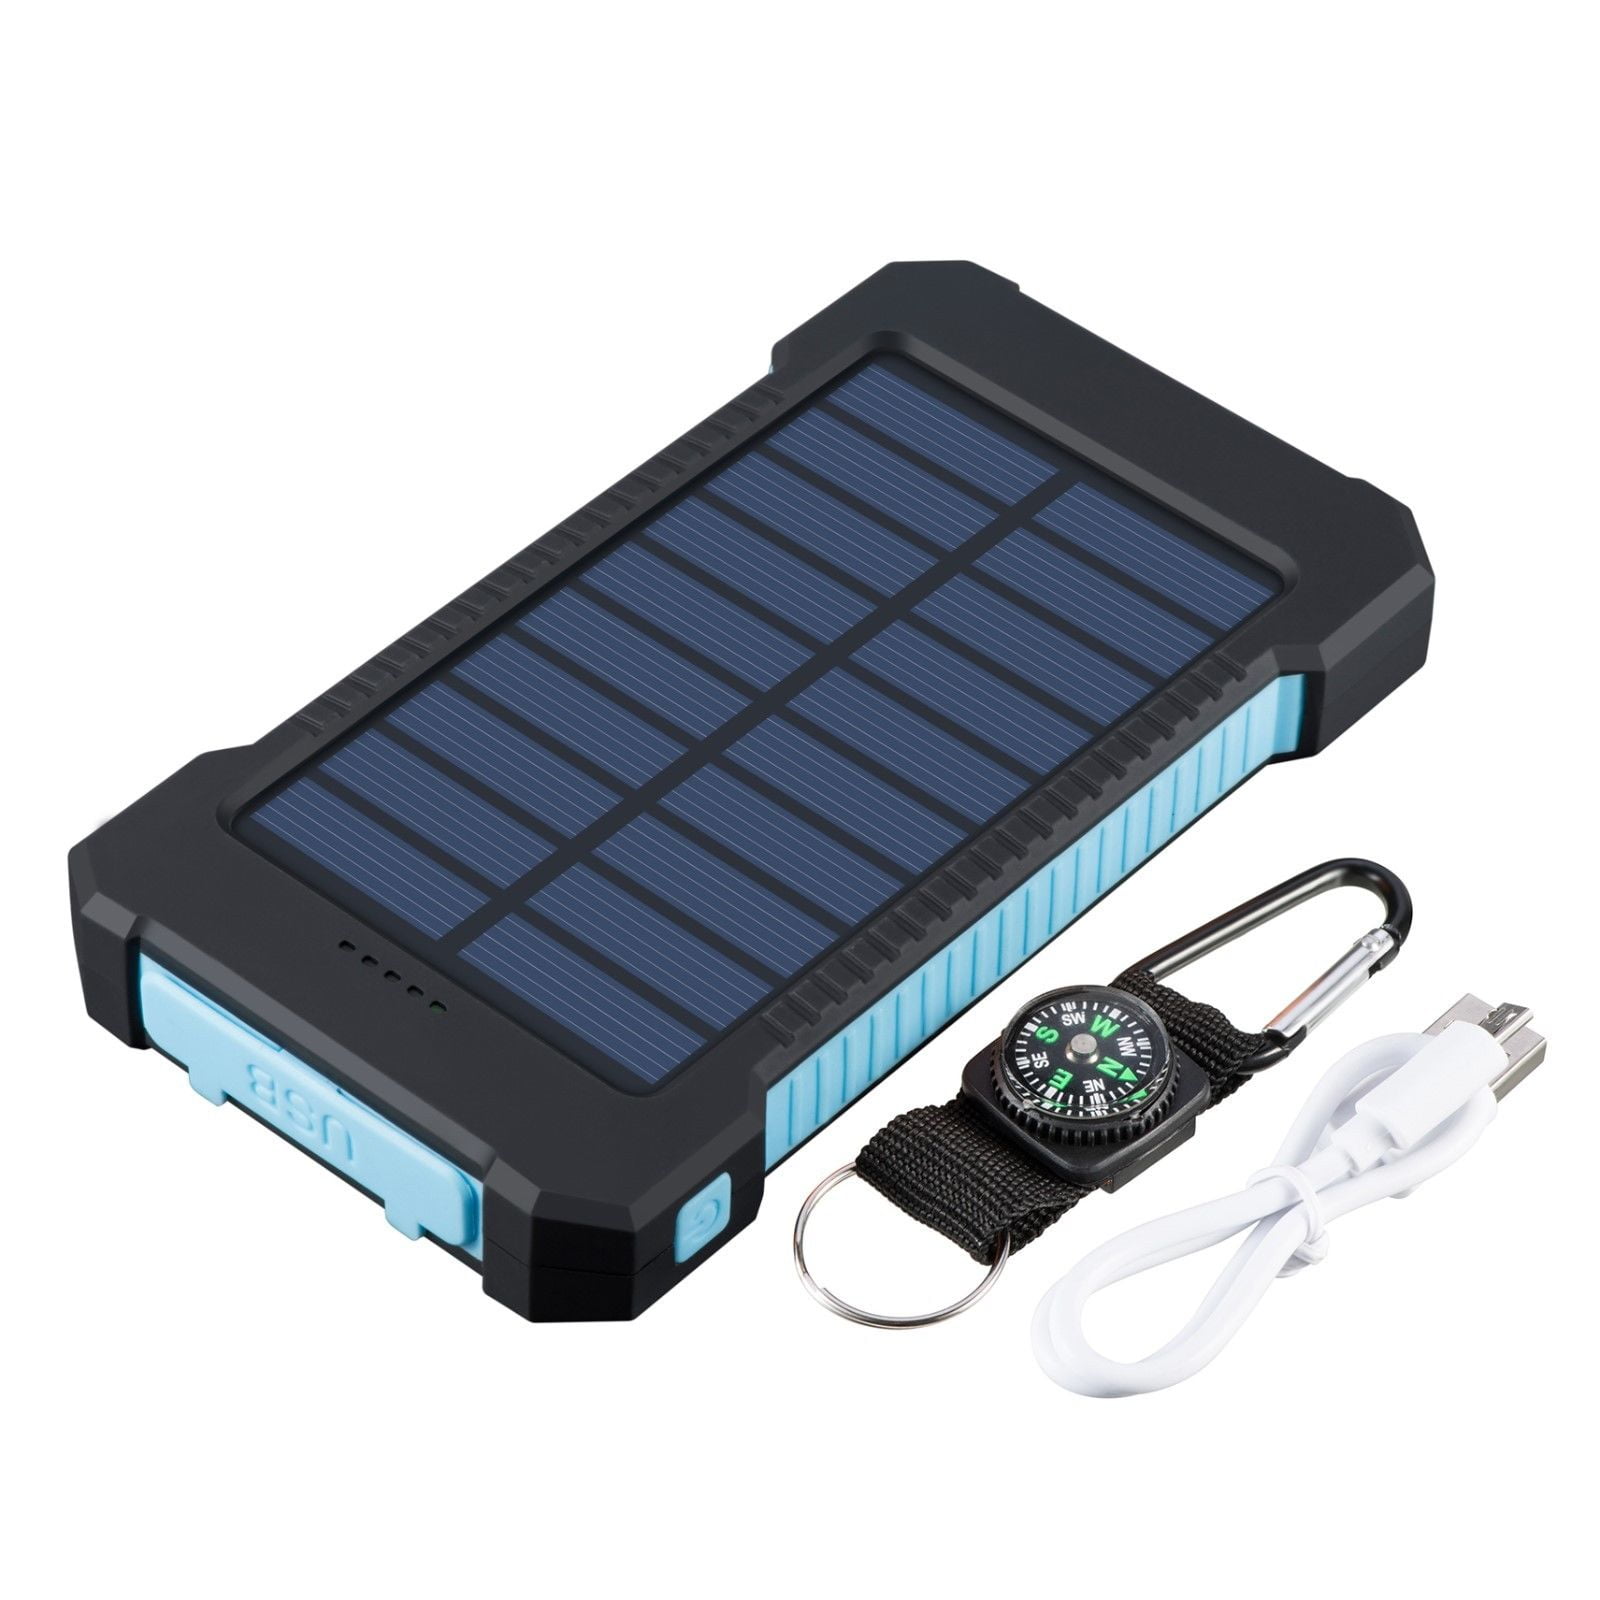 DaMohony 2PACK Solar Charger Portable Solar Power Bank Waterproof Battery Pack with LED Lights for iPhone HUAWEI iPad Samsung and More Camping Travel